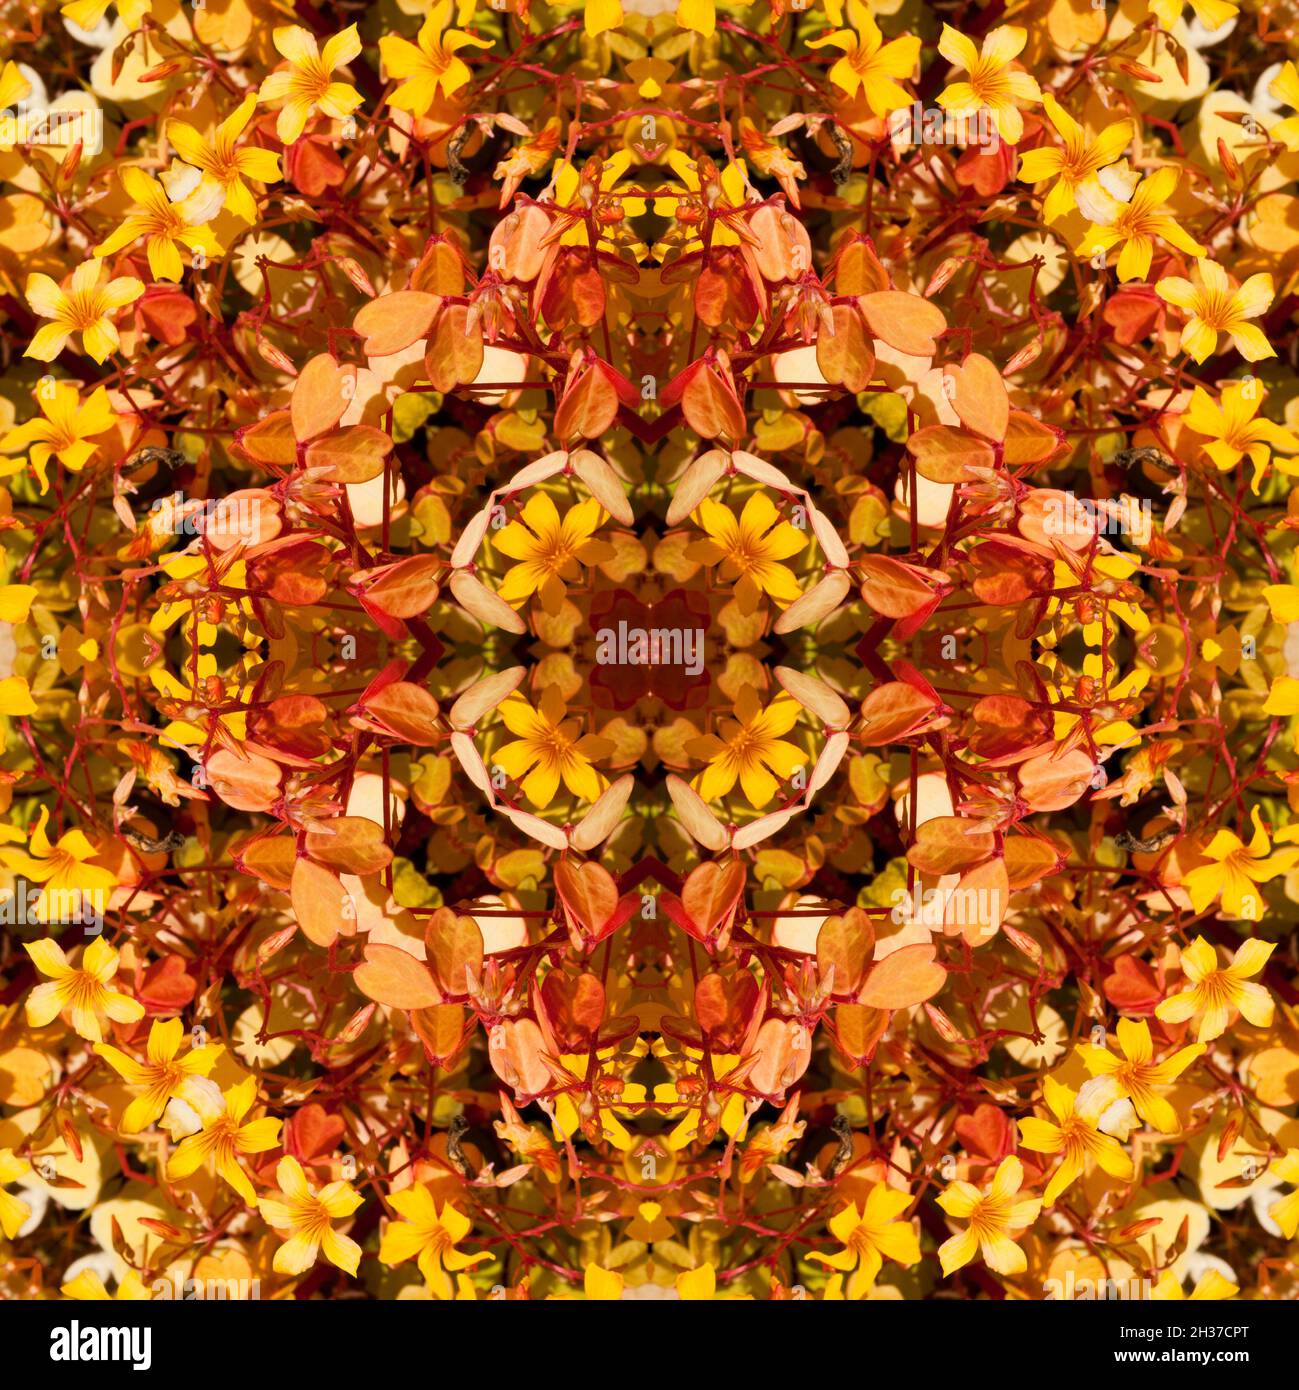 Kaleidoscope of small yellow floewrs with heart shaped leaves Stock Photo